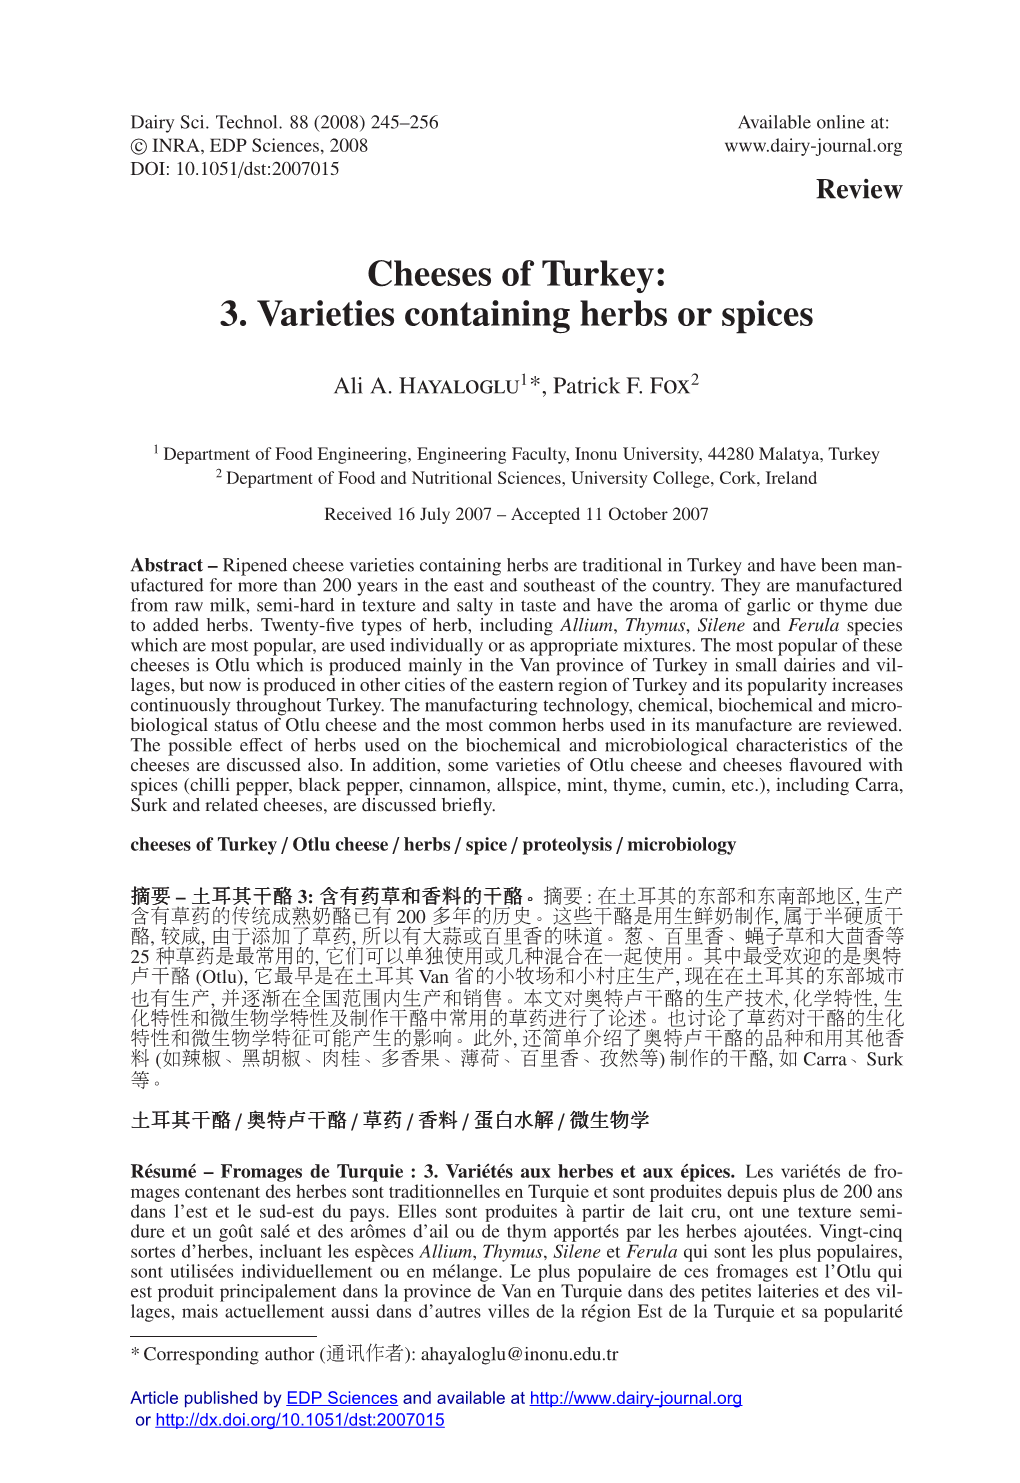 Cheeses of Turkey: 3. Varieties Containing Herbs Or Spices